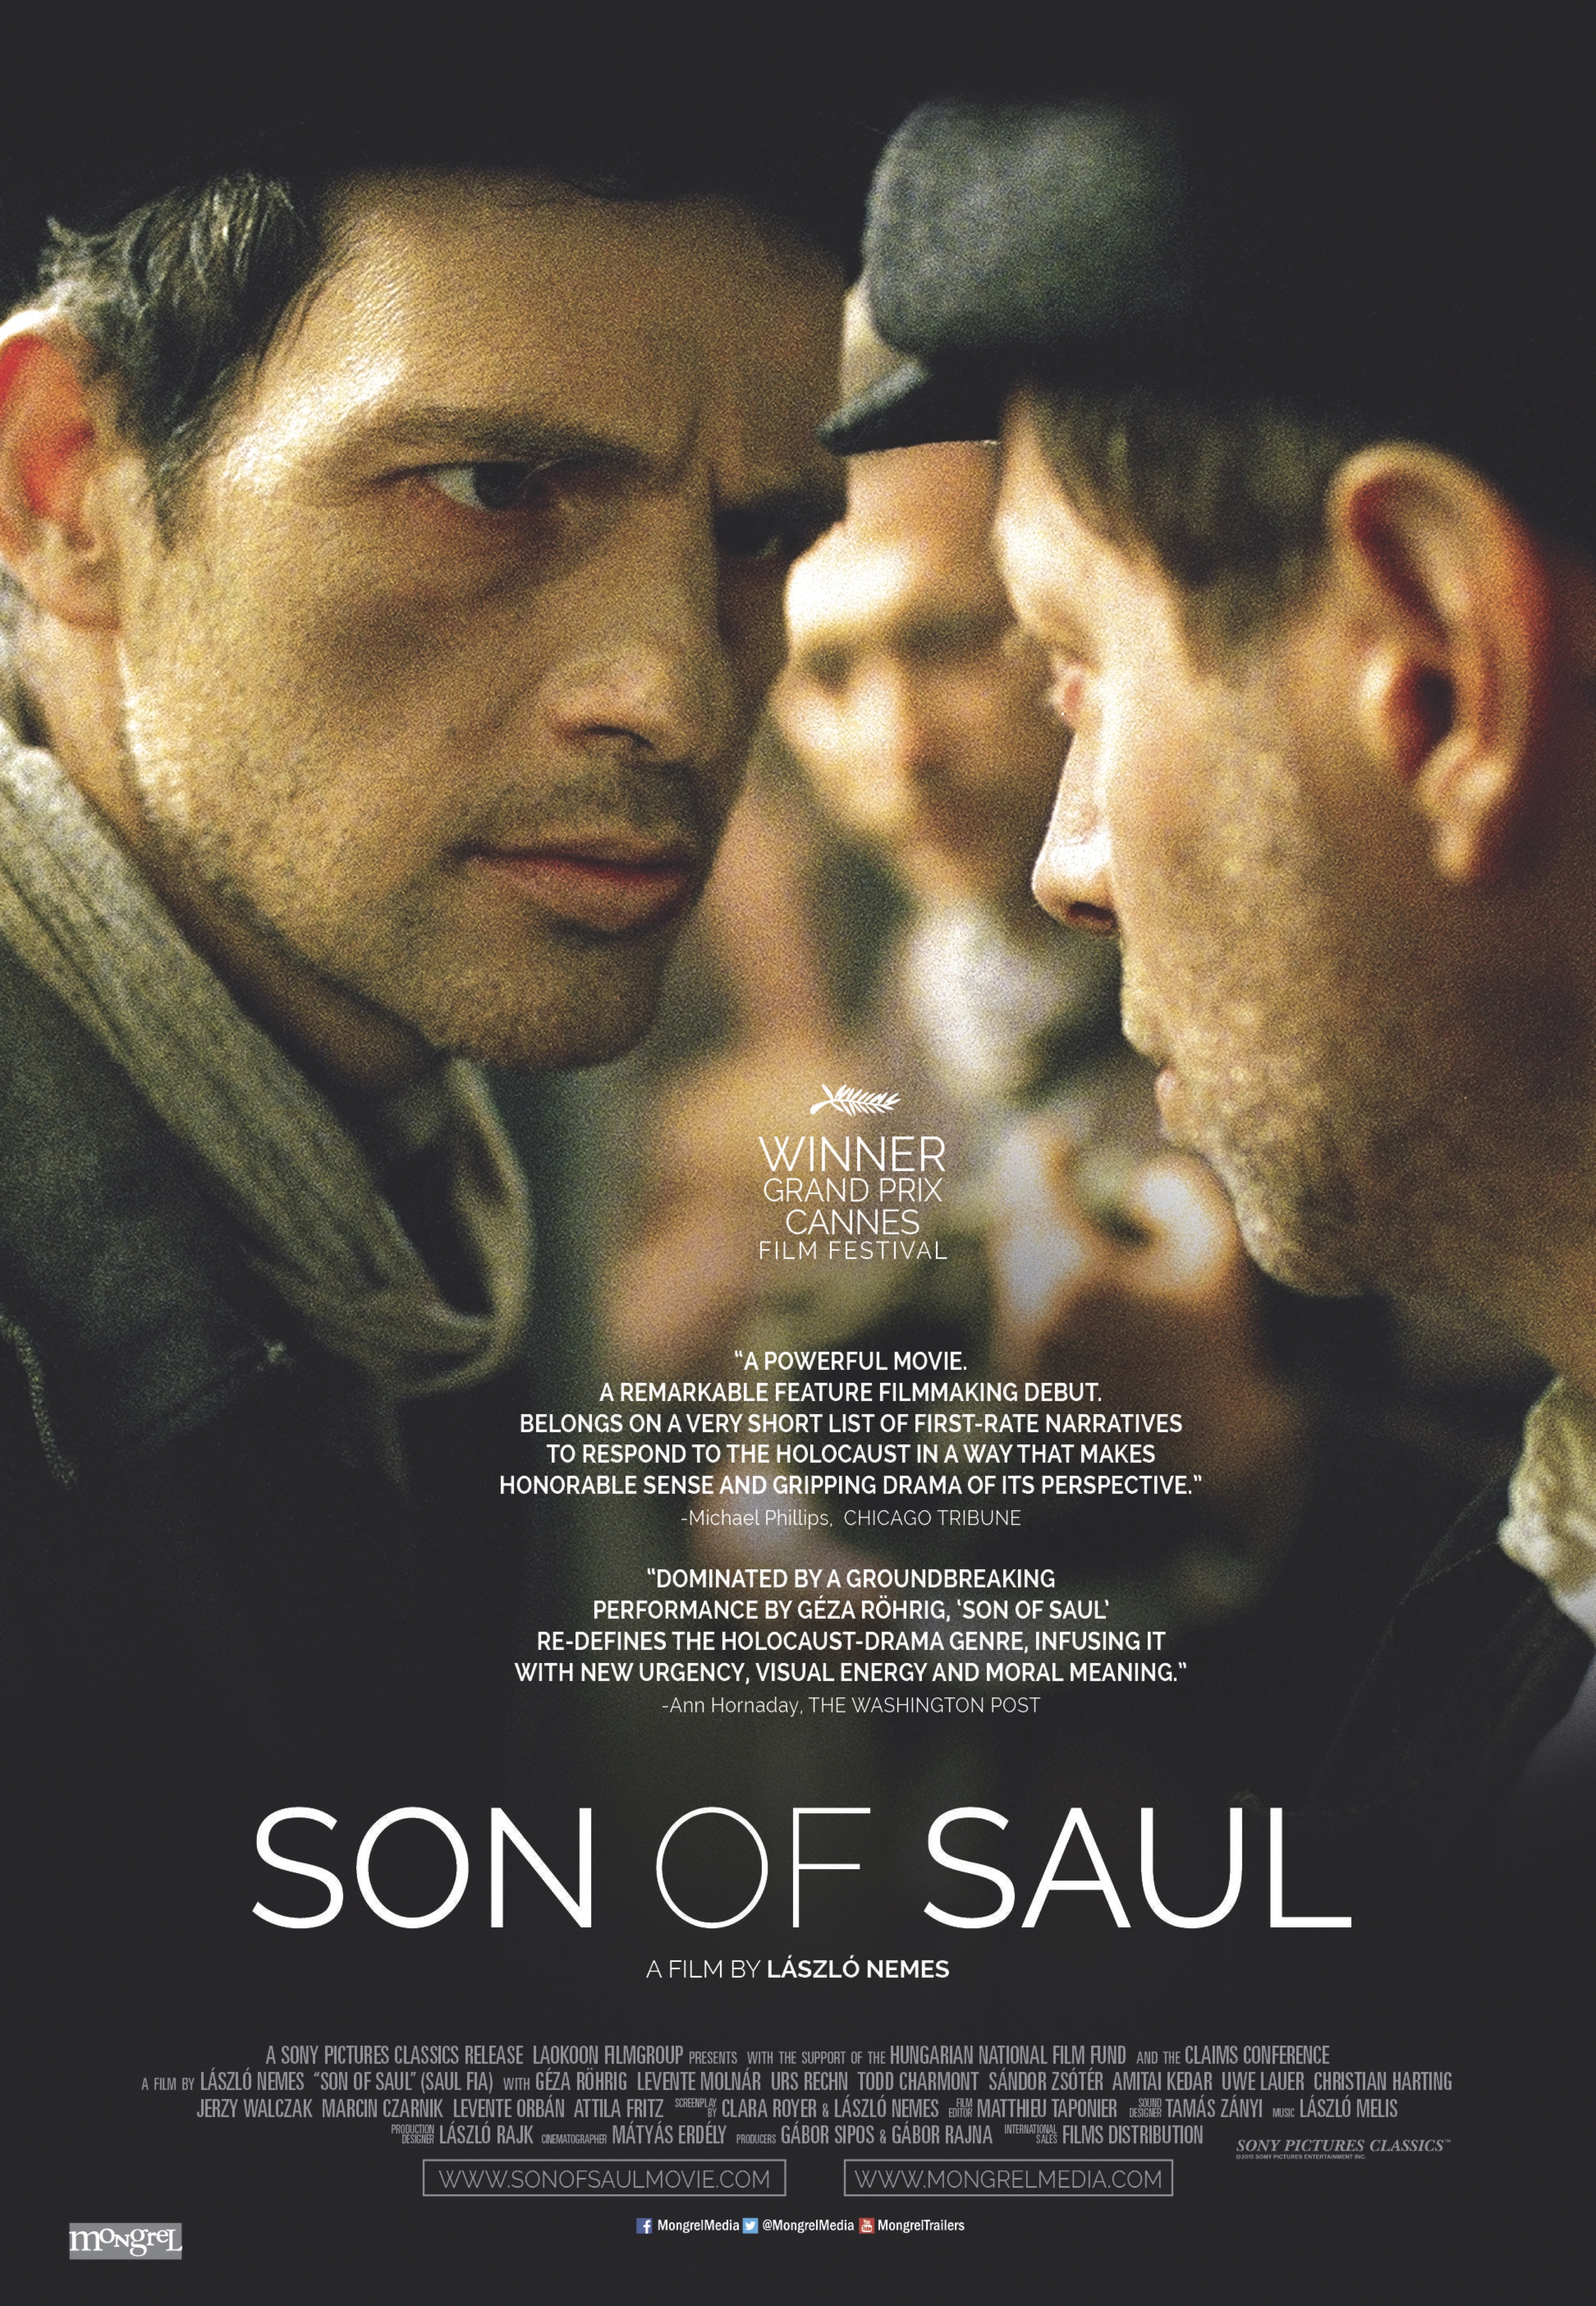 Poster of the movie Saul fia